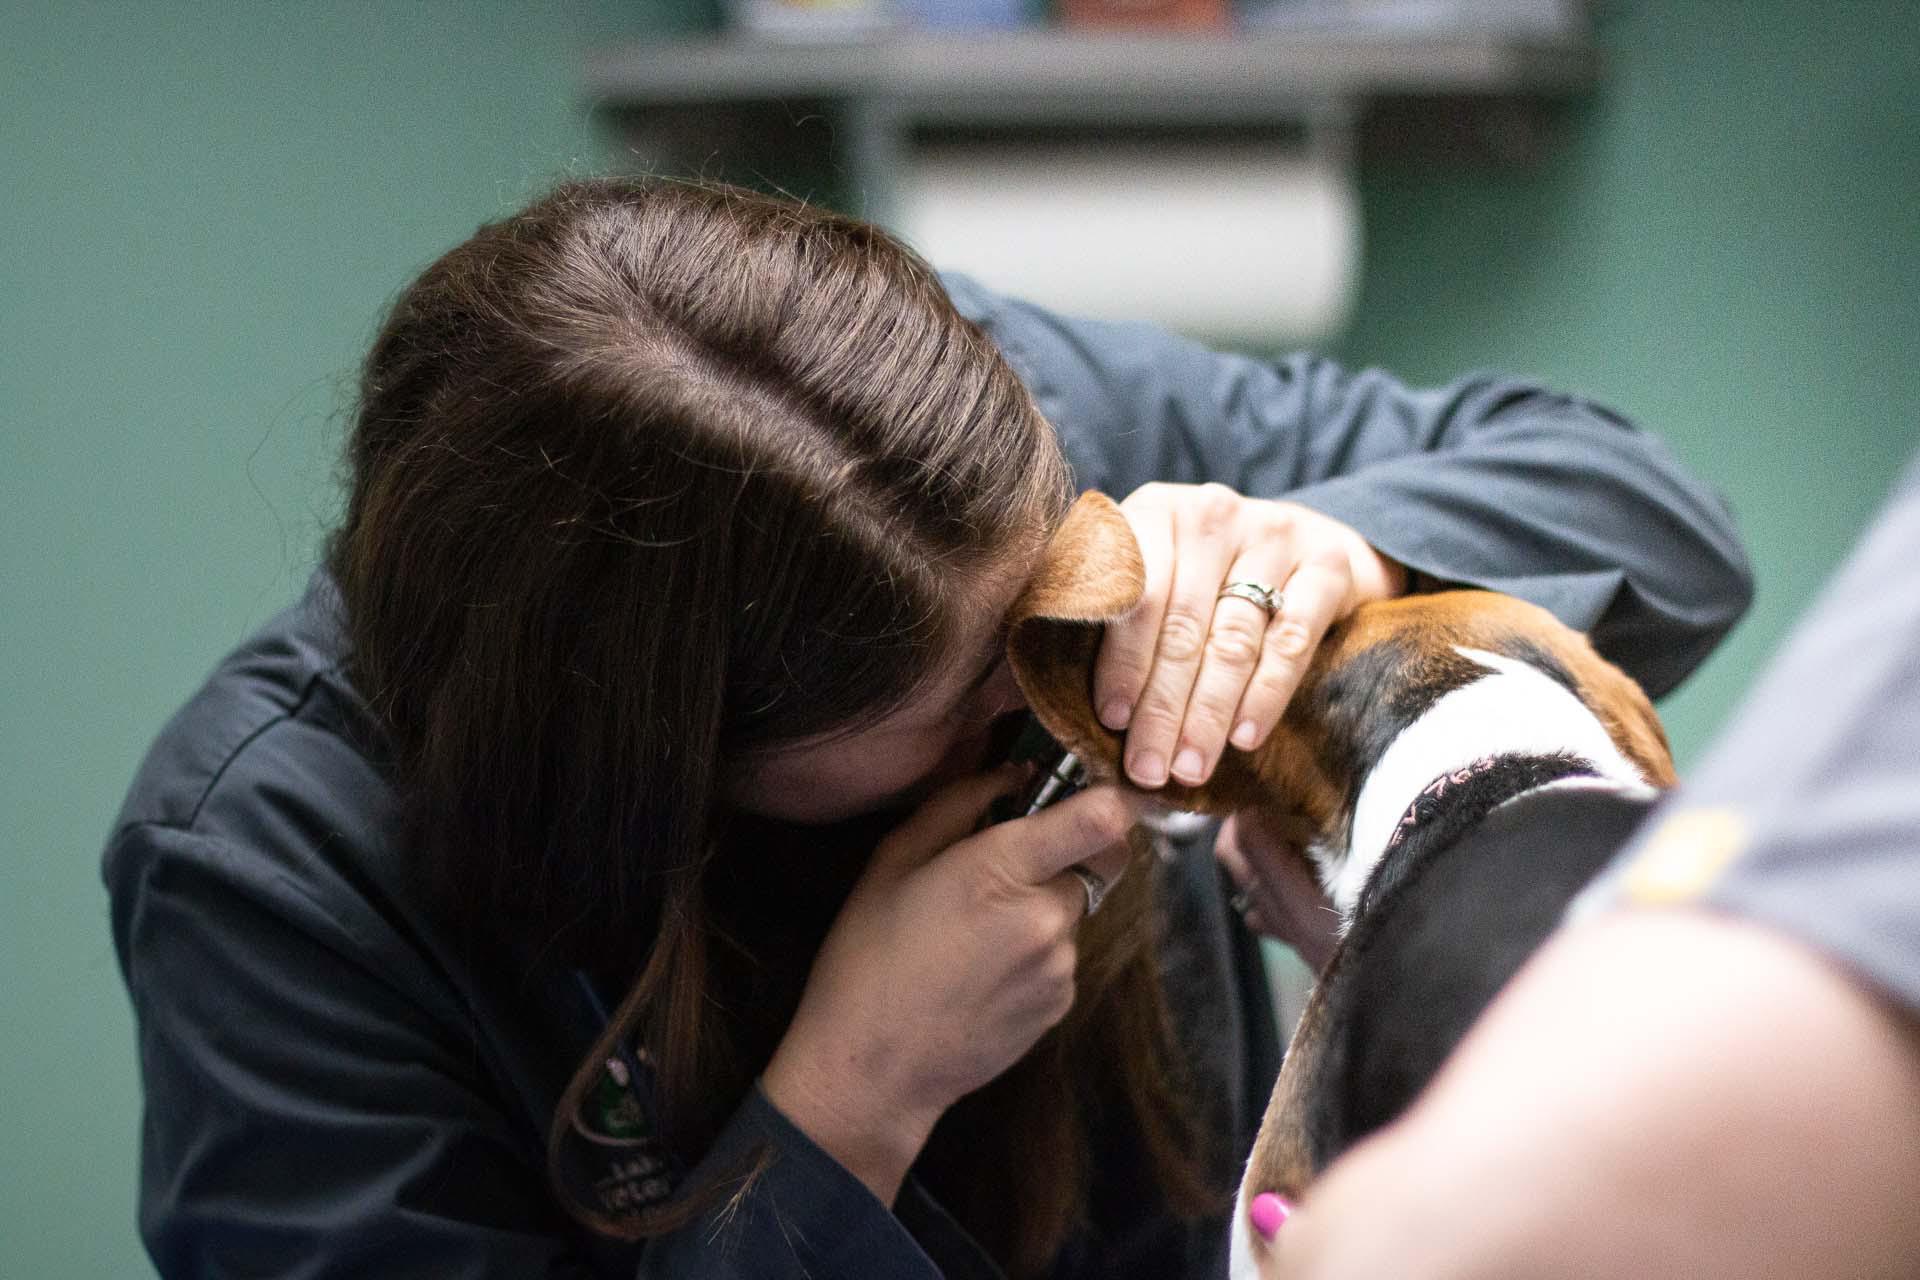 Part of our patients wellness exam is to check the ears, and this adorable pooch was a great patient for Dr. Erica as she conducted the ear exam.